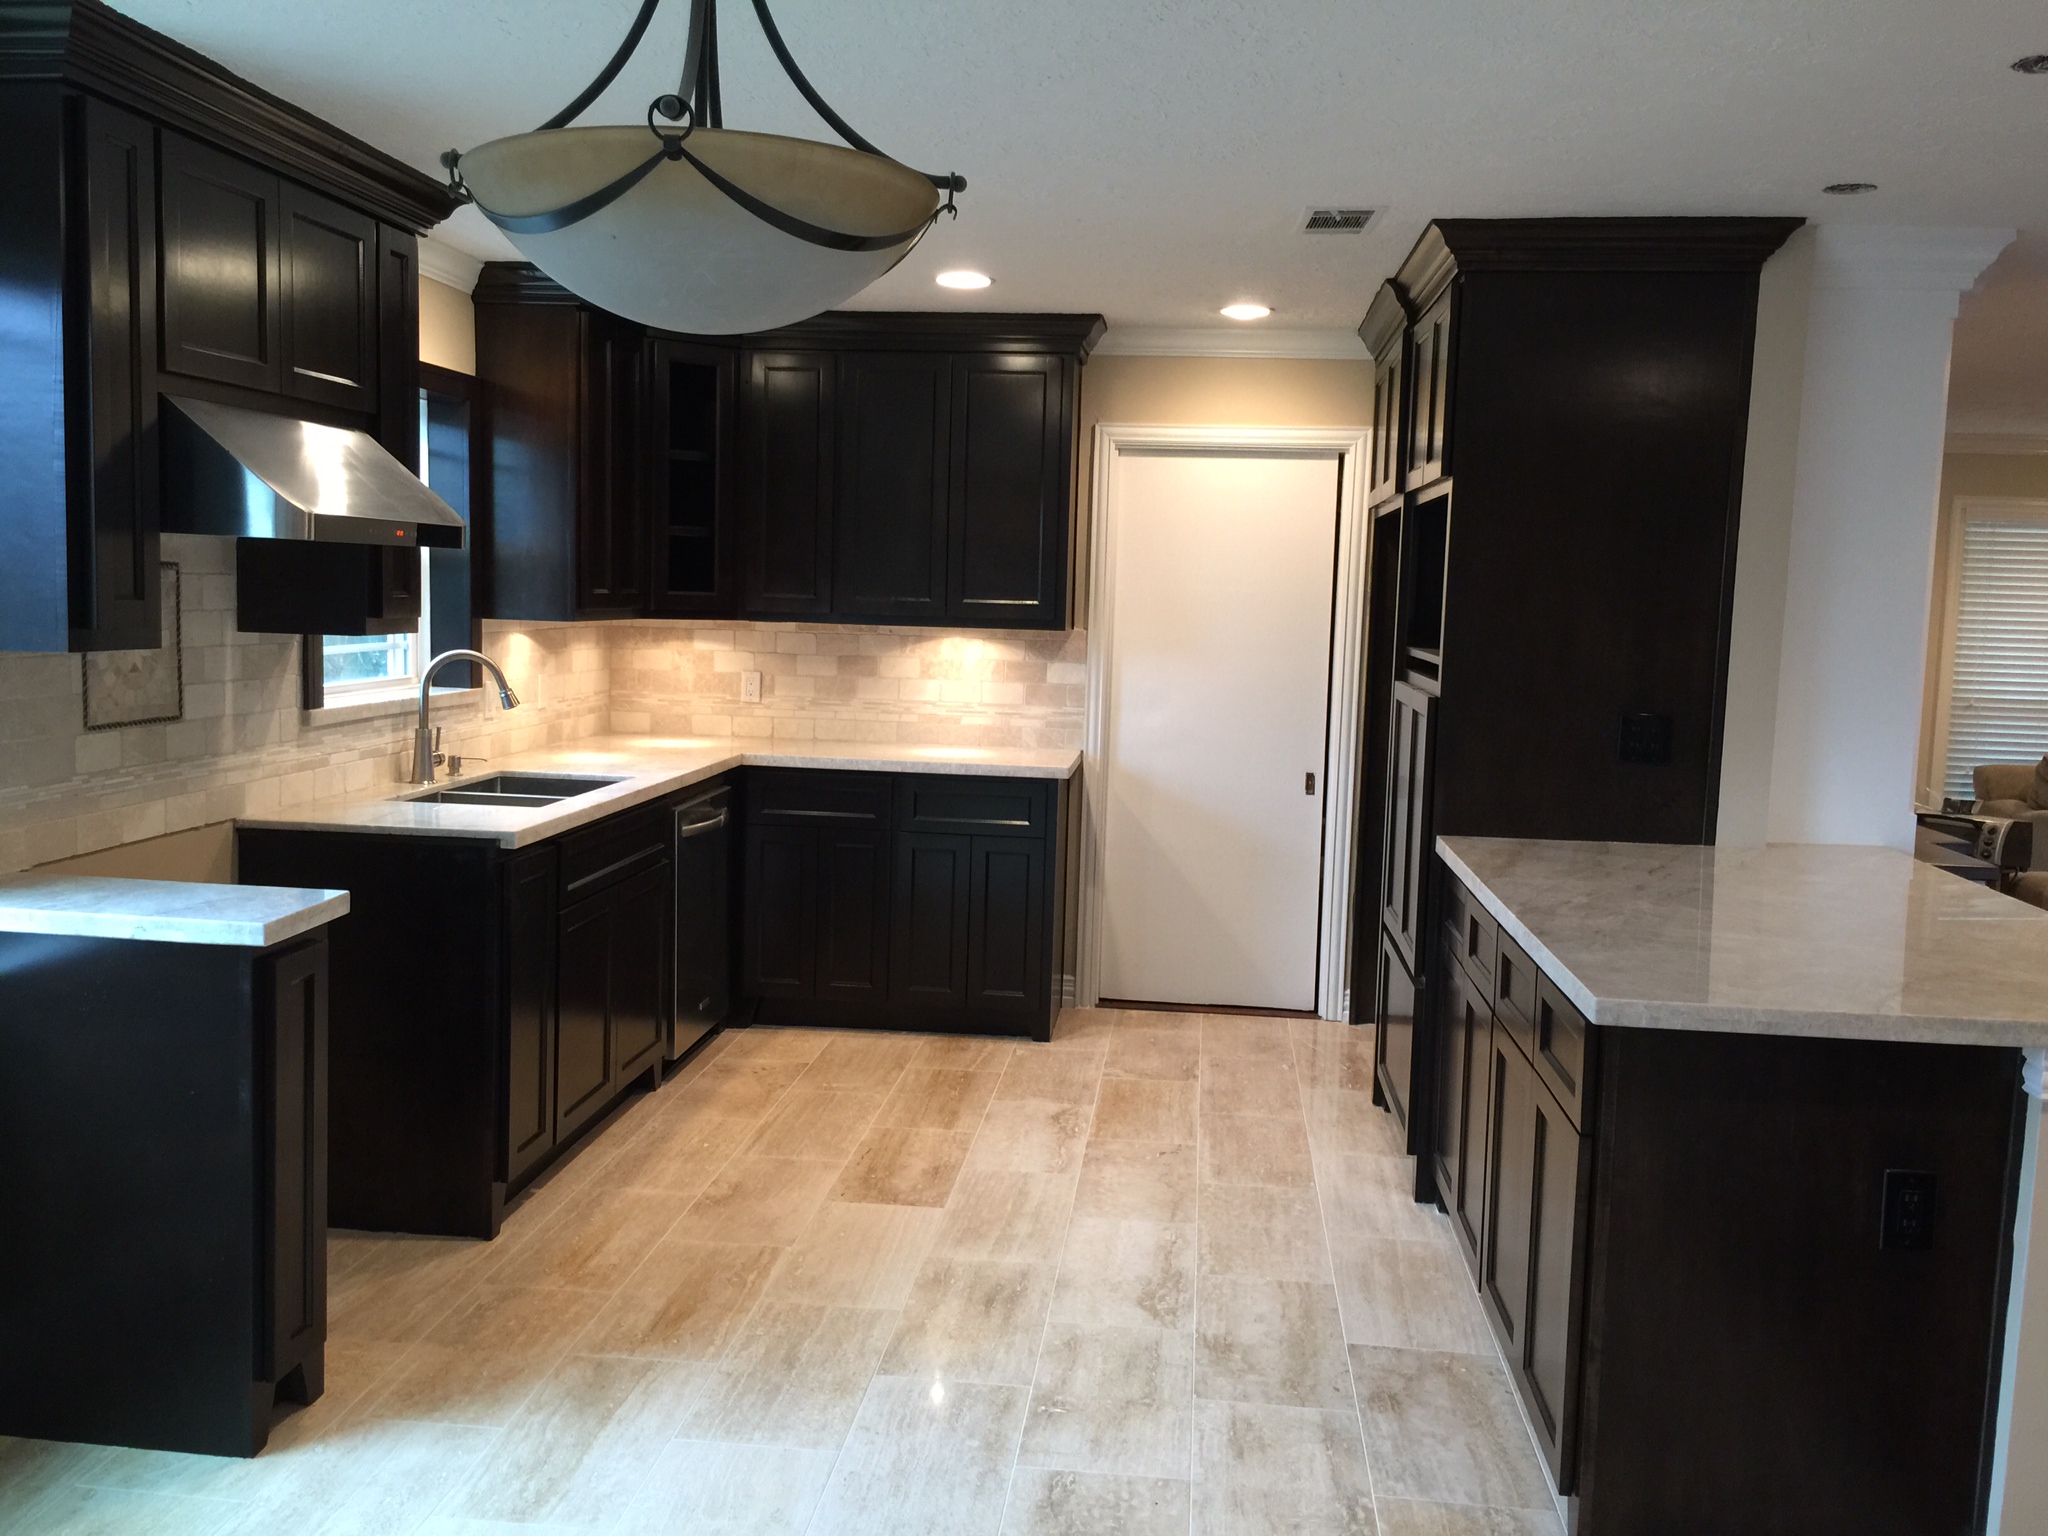 Kitchen with Remodeled floors, cabinets, counter tops and appliances